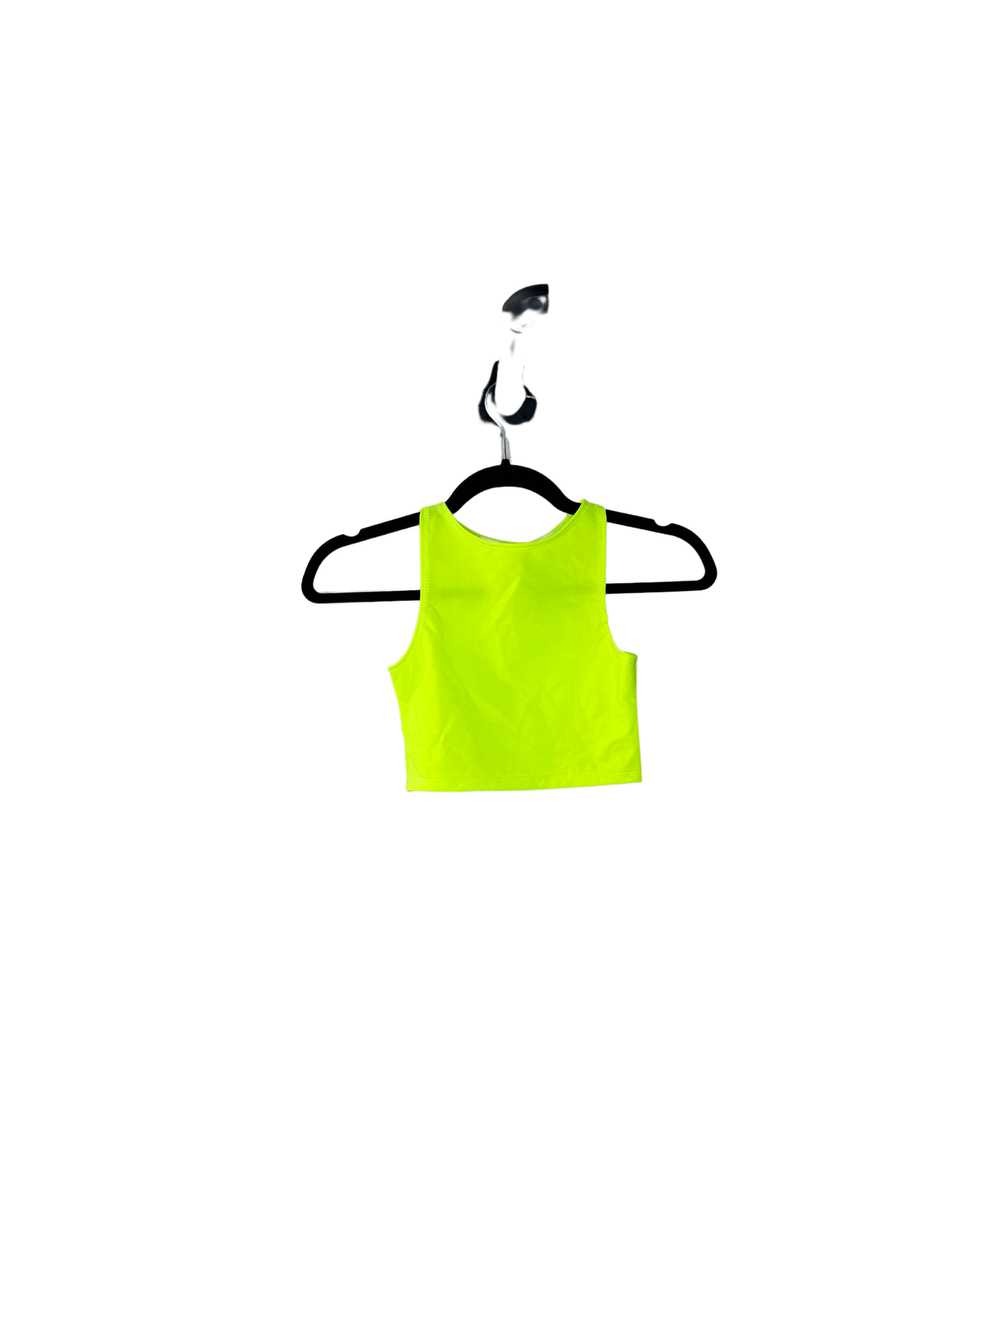 Freedom Rave Wear Neon Yellow Crop Top - image 1